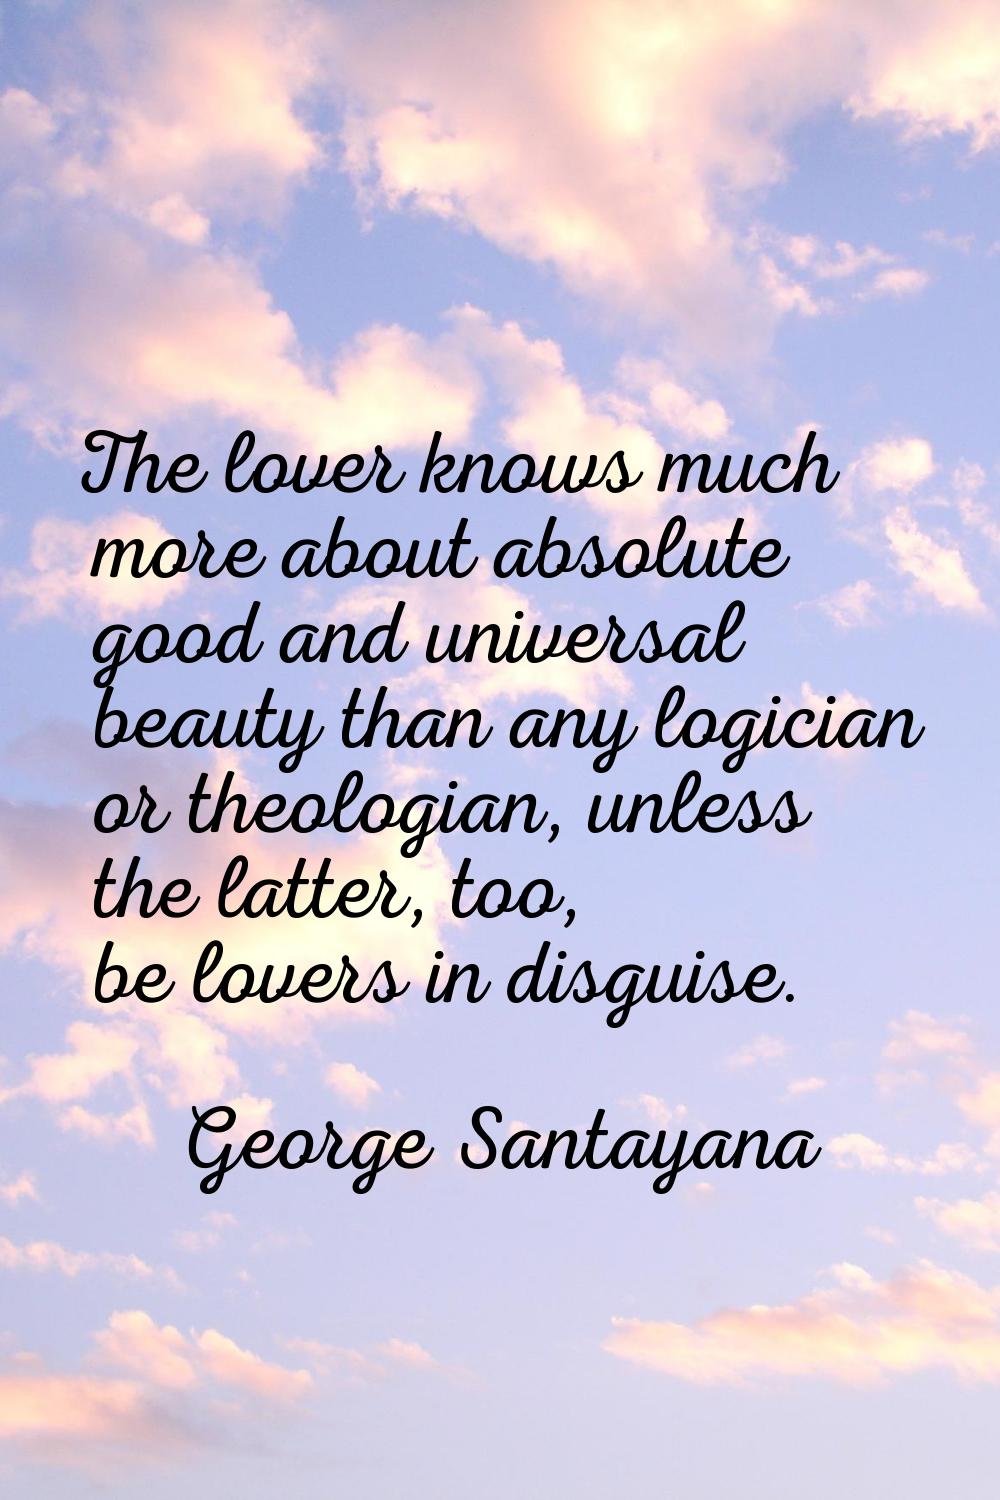 The lover knows much more about absolute good and universal beauty than any logician or theologian,